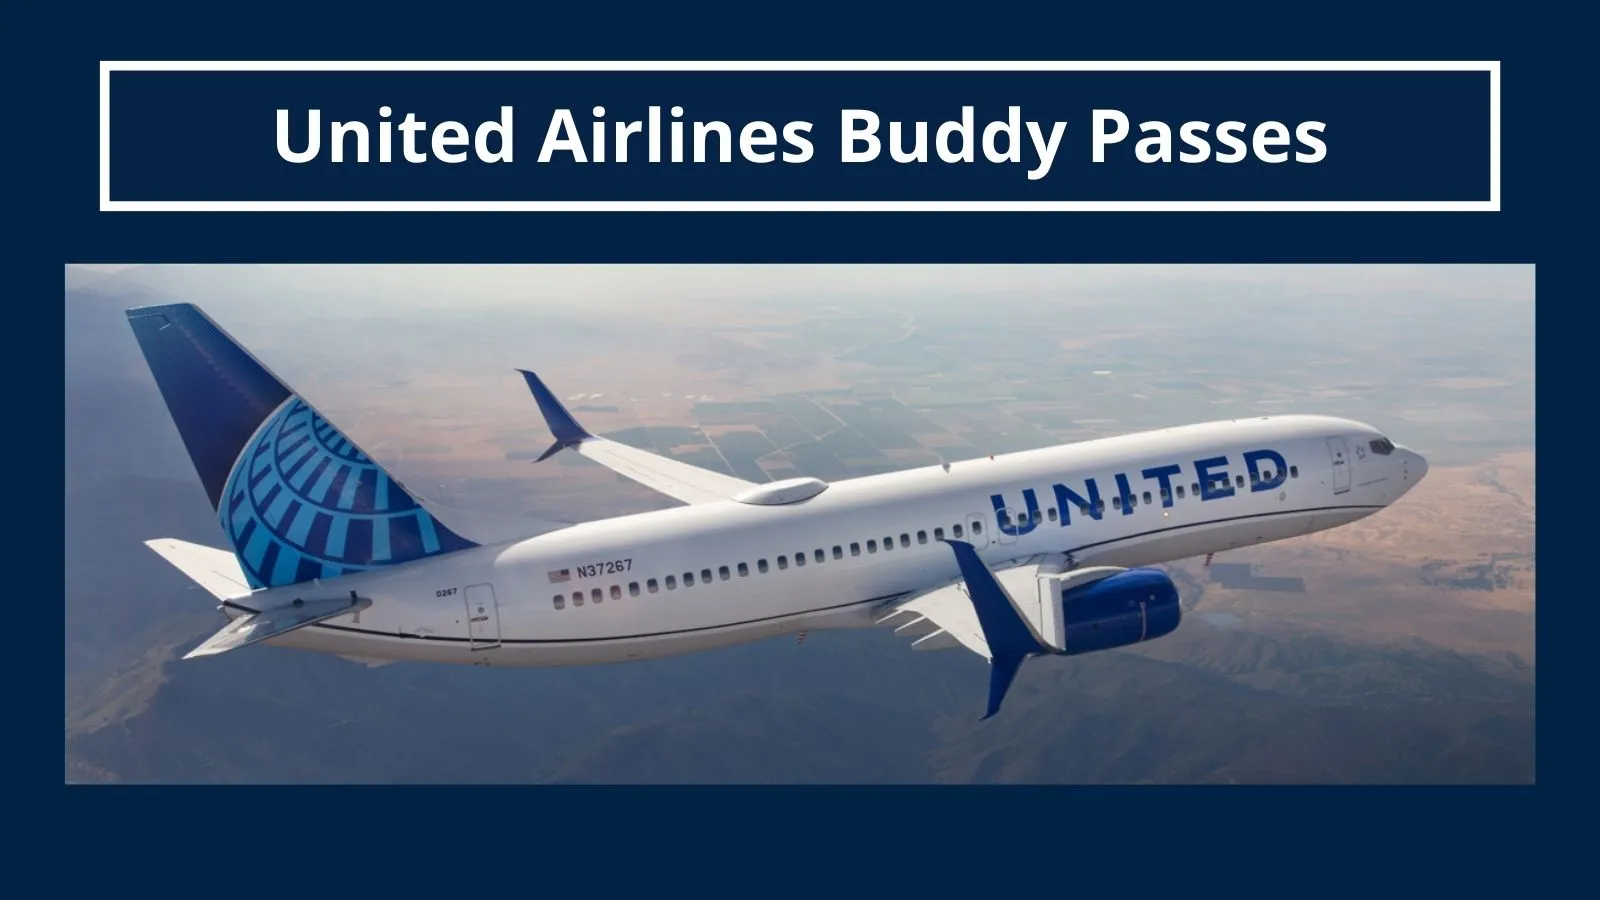 United Airlines Buddy Pass for Employees